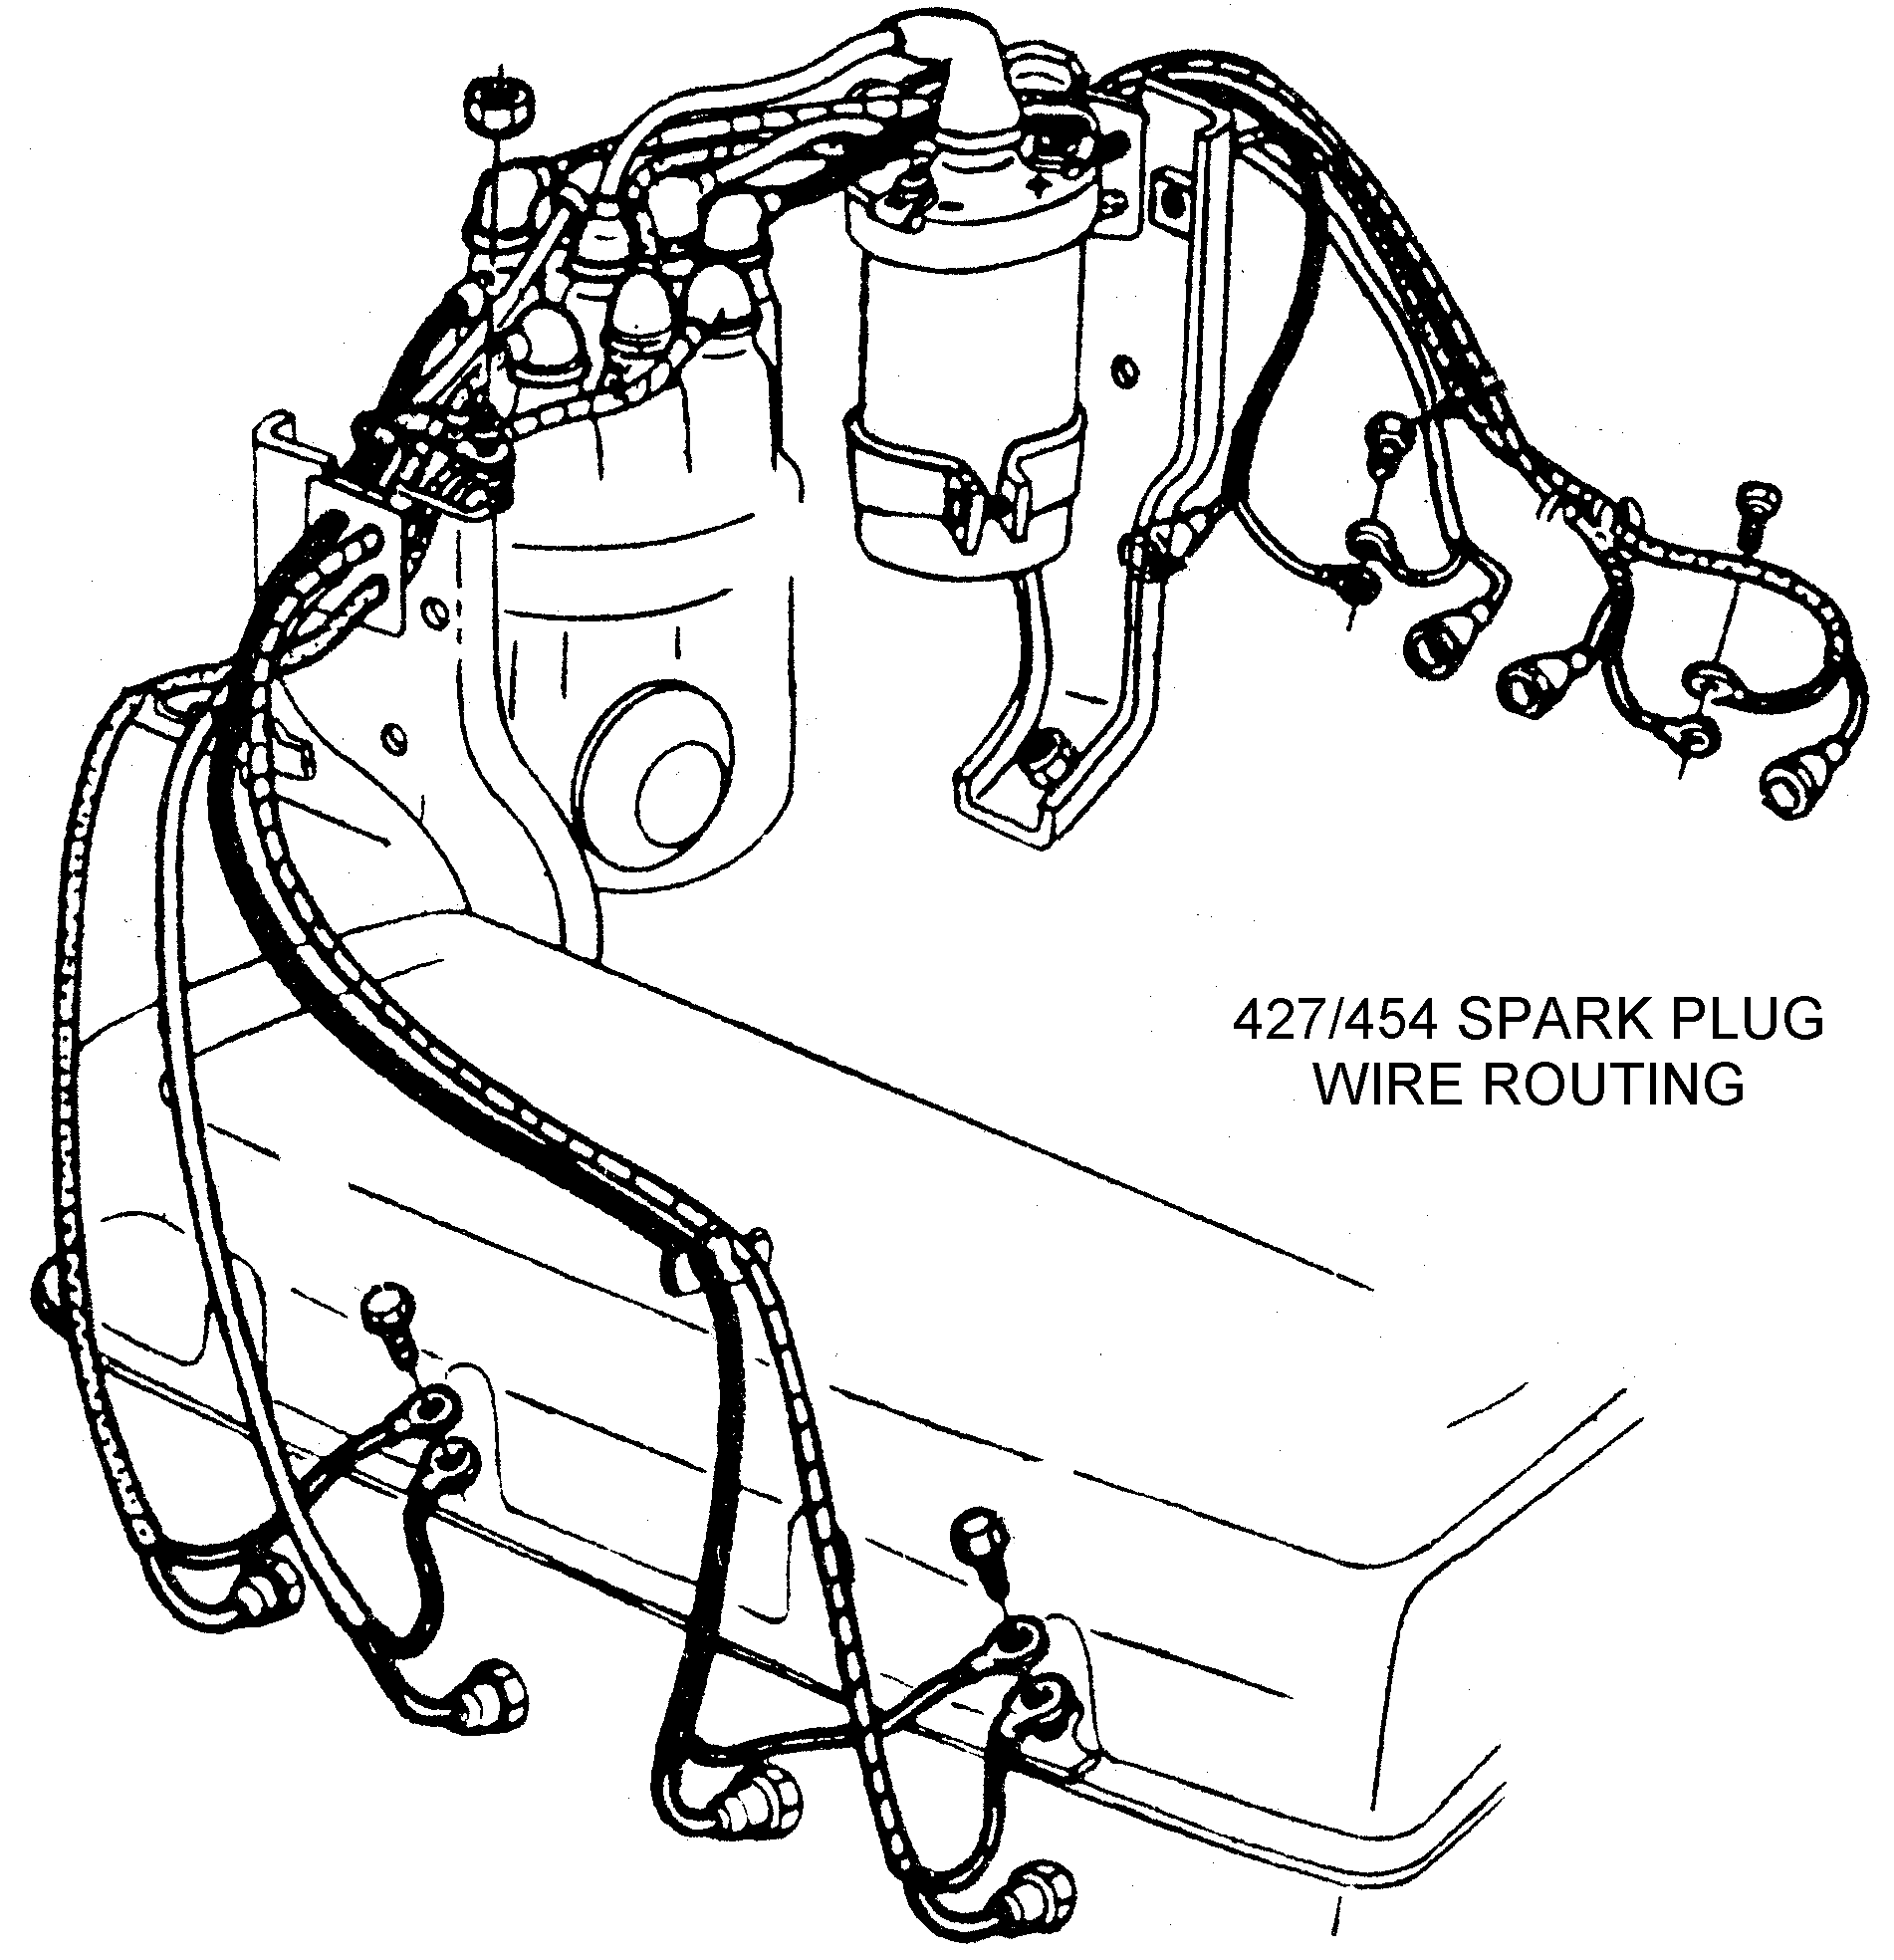 Spark Plug Wire Routing - Diagram View